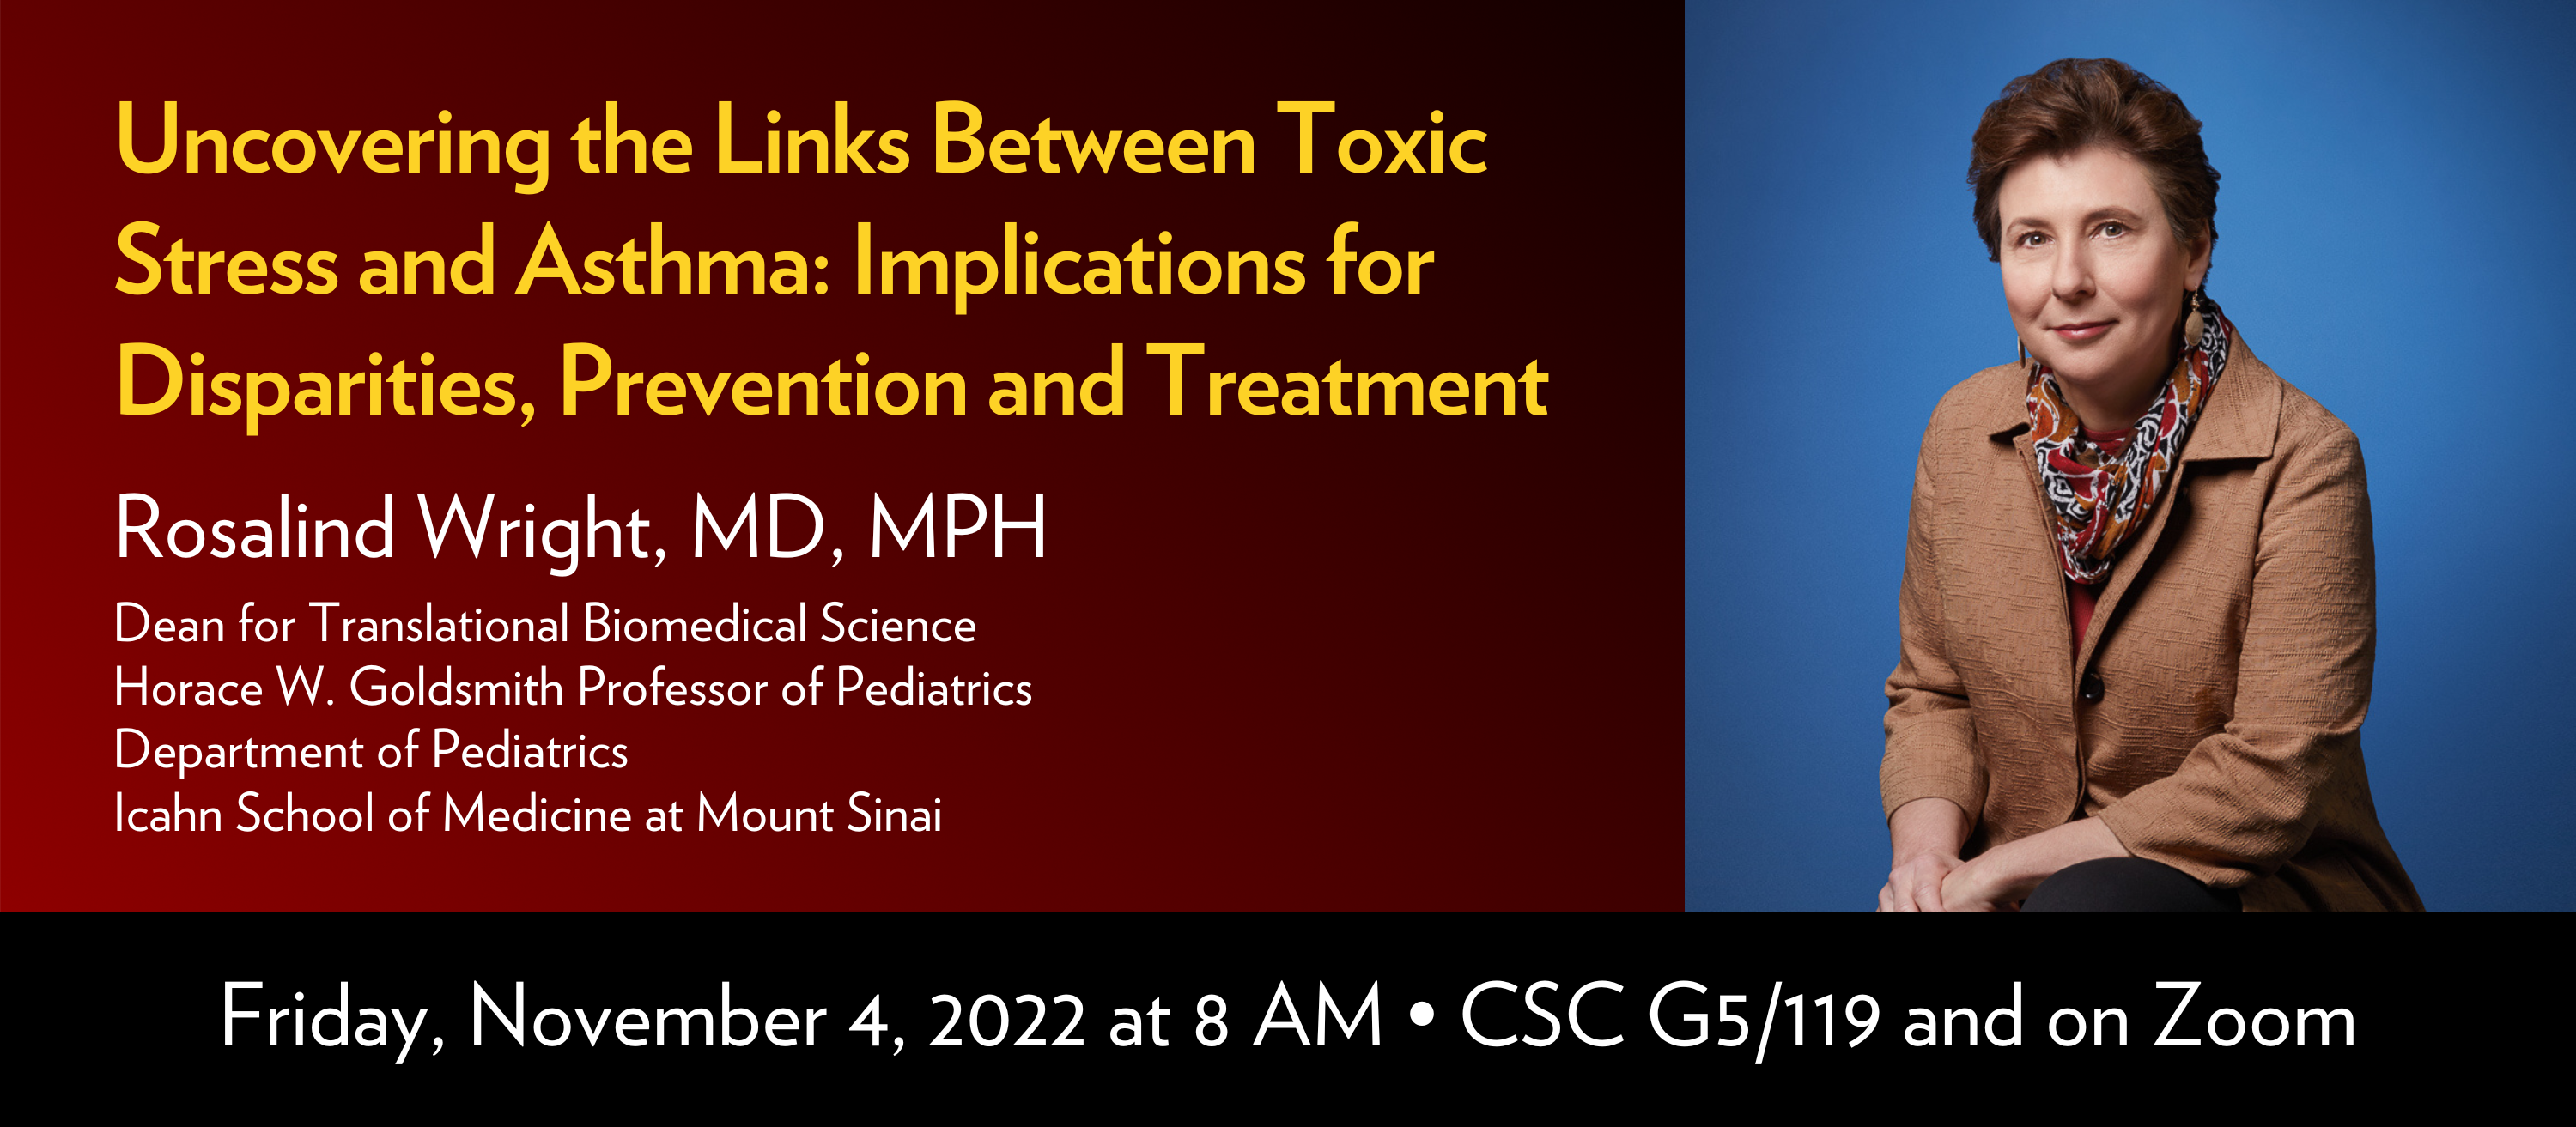 Title: Uncovering the Links Between Toxic Stress and Asthma: Implications for Disparities, Prevention and Treatment